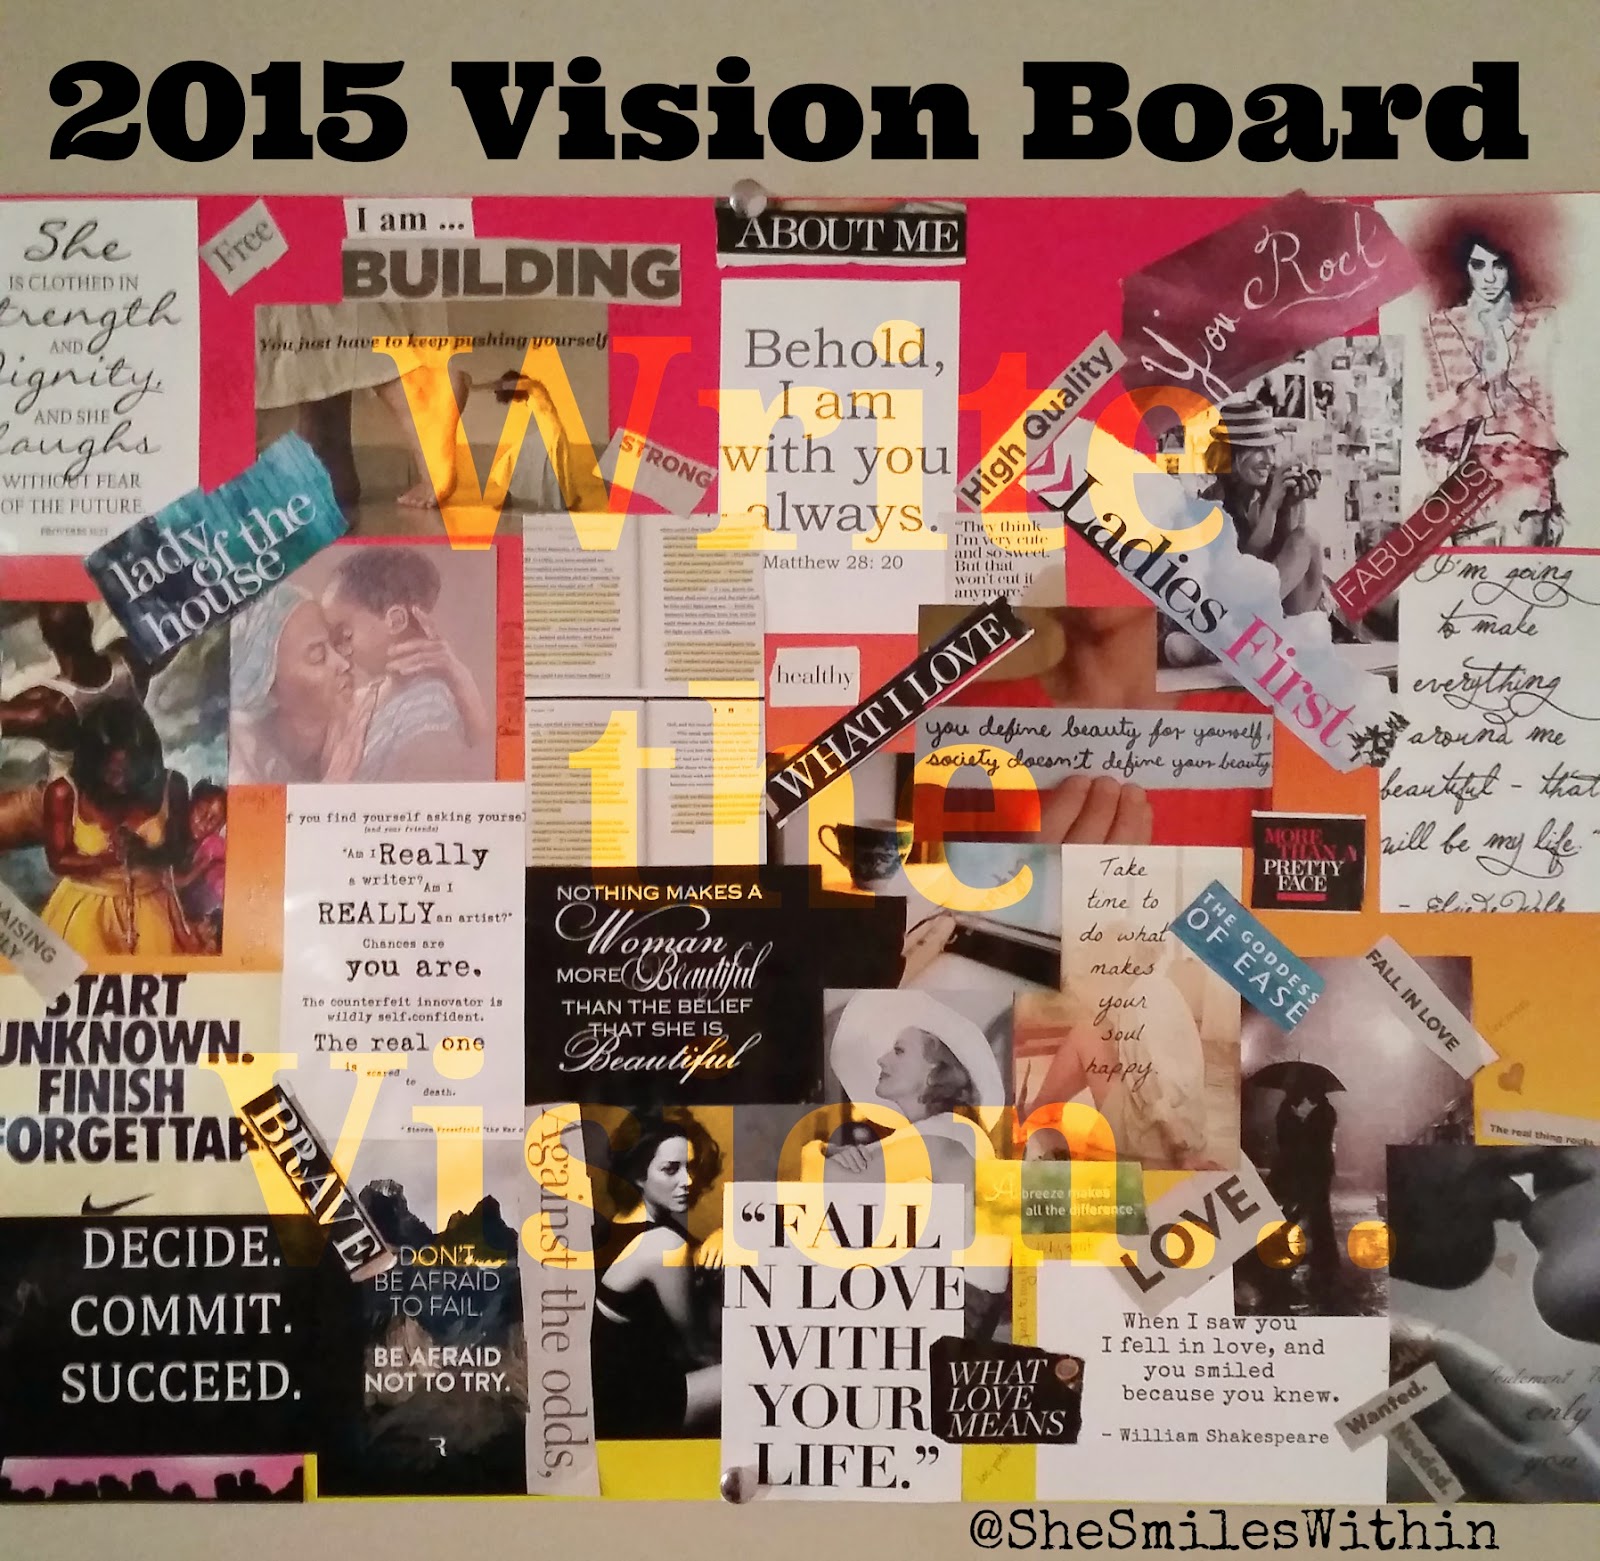 She Smiles Within: Vision Board: Where are you going in 2015? Five Tips ...